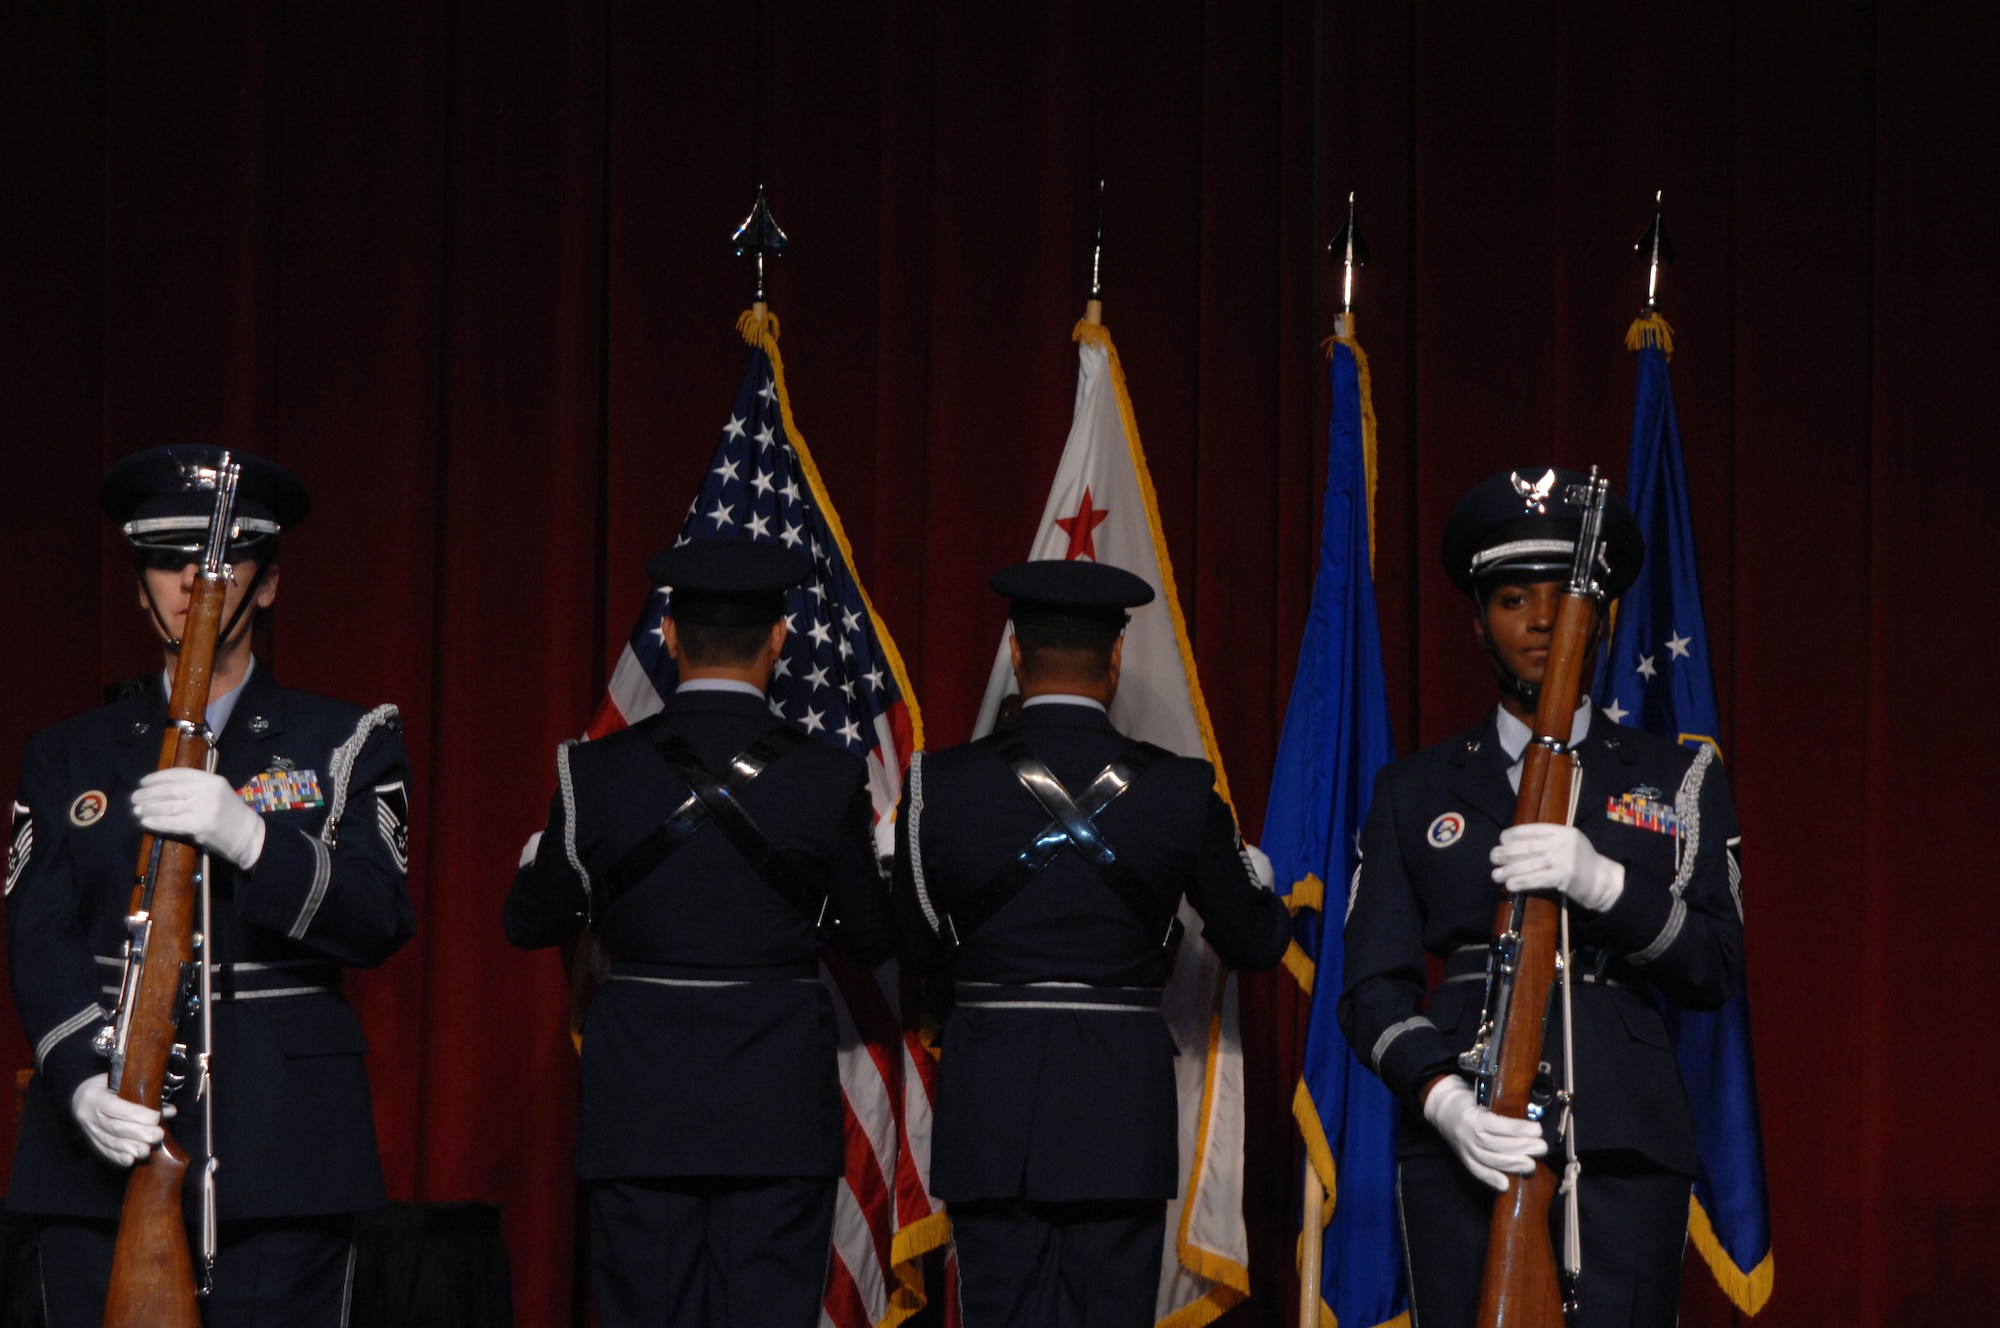 The Fourth Air Force Color Guard posts the Colors during the 11th Annual Raincross Trophy Dinner held July 23, 2009, at the Riverside Convention Center, Riverside, Calif.. The dinner is hosted by the Greater Riverside Chambers of Commerce Military Affairs Committee to honor and recognize the 11 wings and two groups in Fourth Air Force. (U.S. Air Force photo/Senior Master Sgt. Kim Allain)  (released)